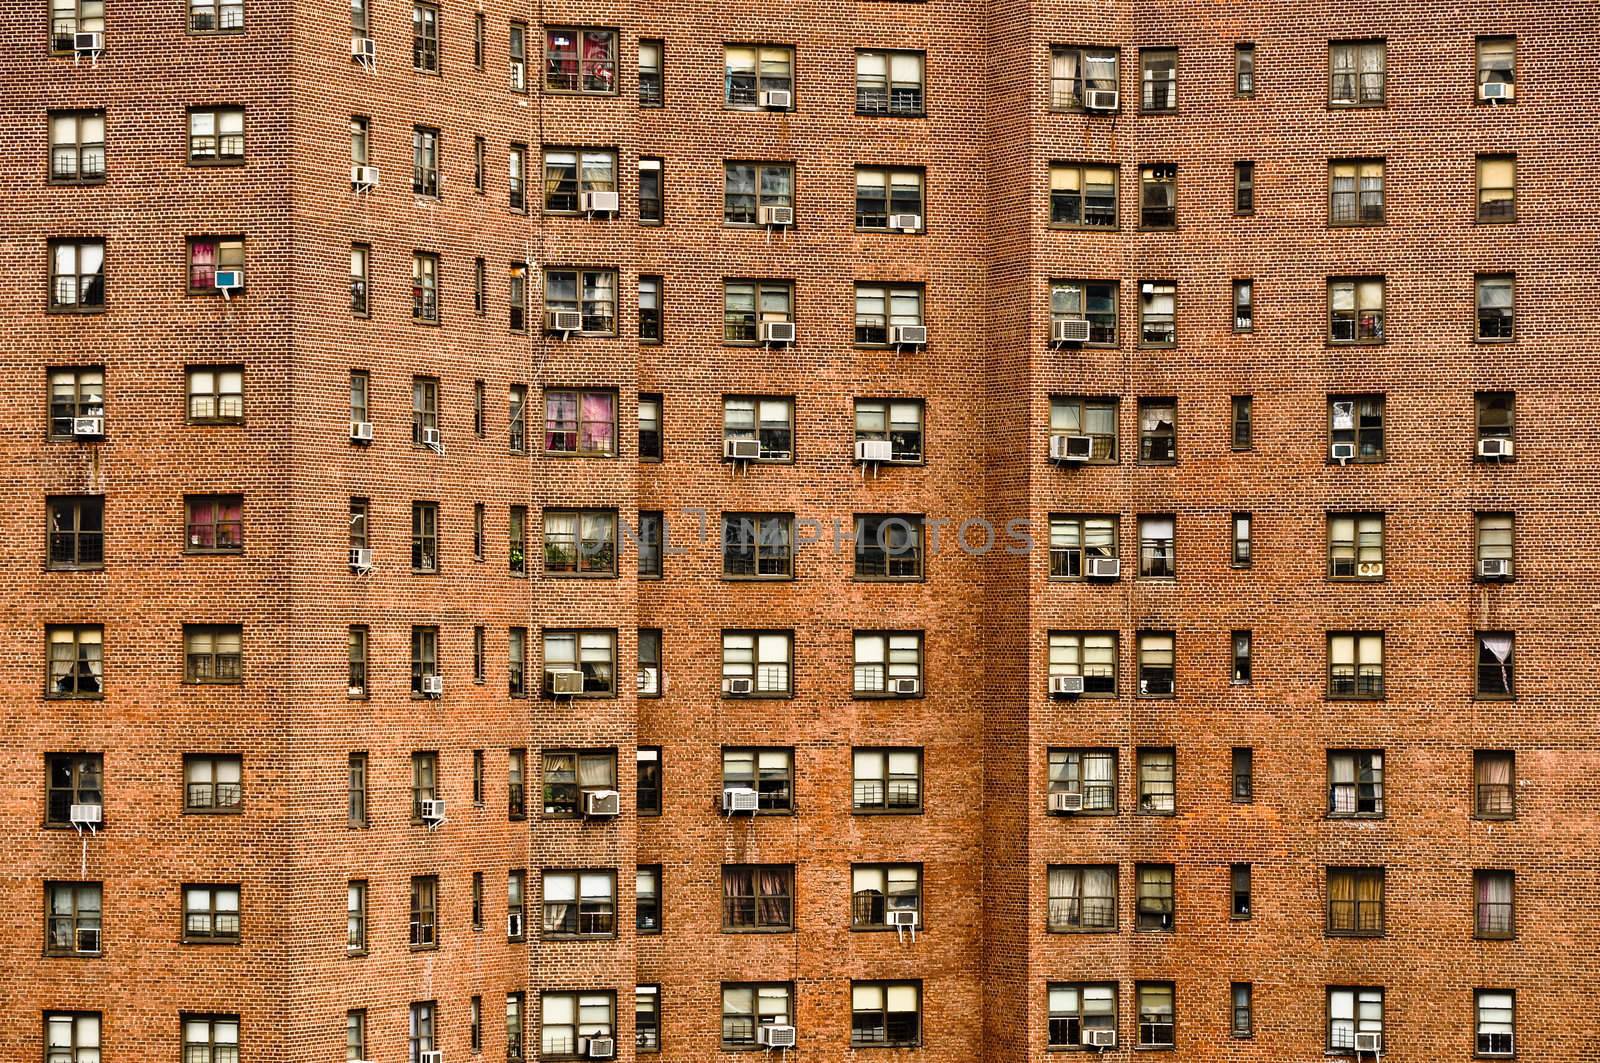 Residential building windows in New York by martinm303